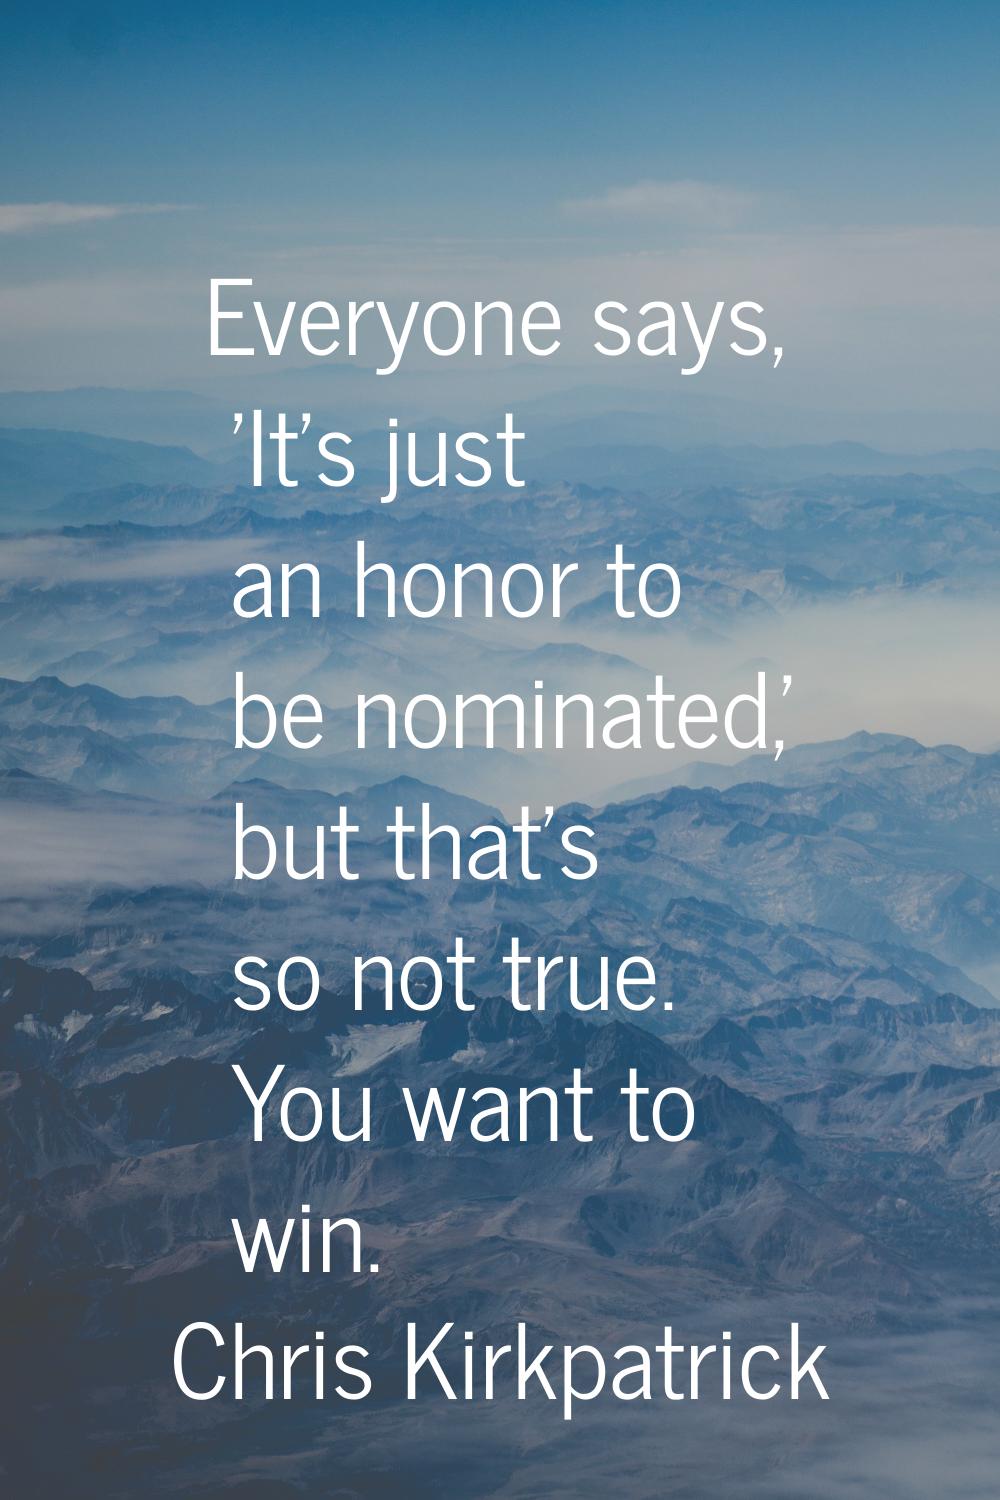 Everyone says, 'It's just an honor to be nominated,' but that's so not true. You want to win.